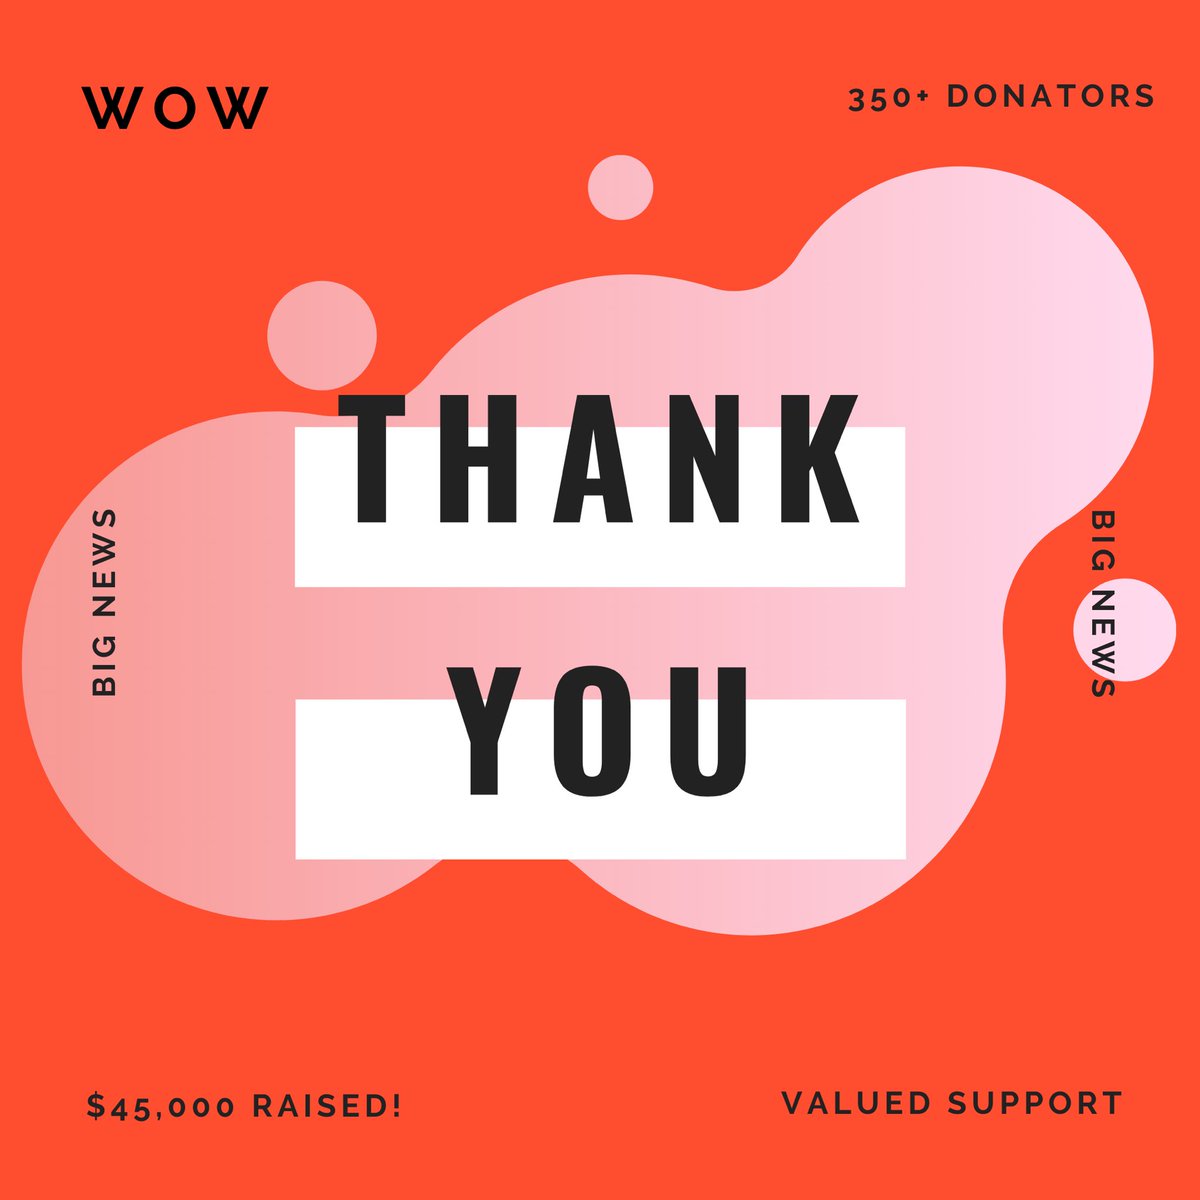 And overall, thank you to the outpouring of support in donations that we received in the past 6 weeks. This support has already allowed us to implement more sustainable forms of racial impact endeavors.